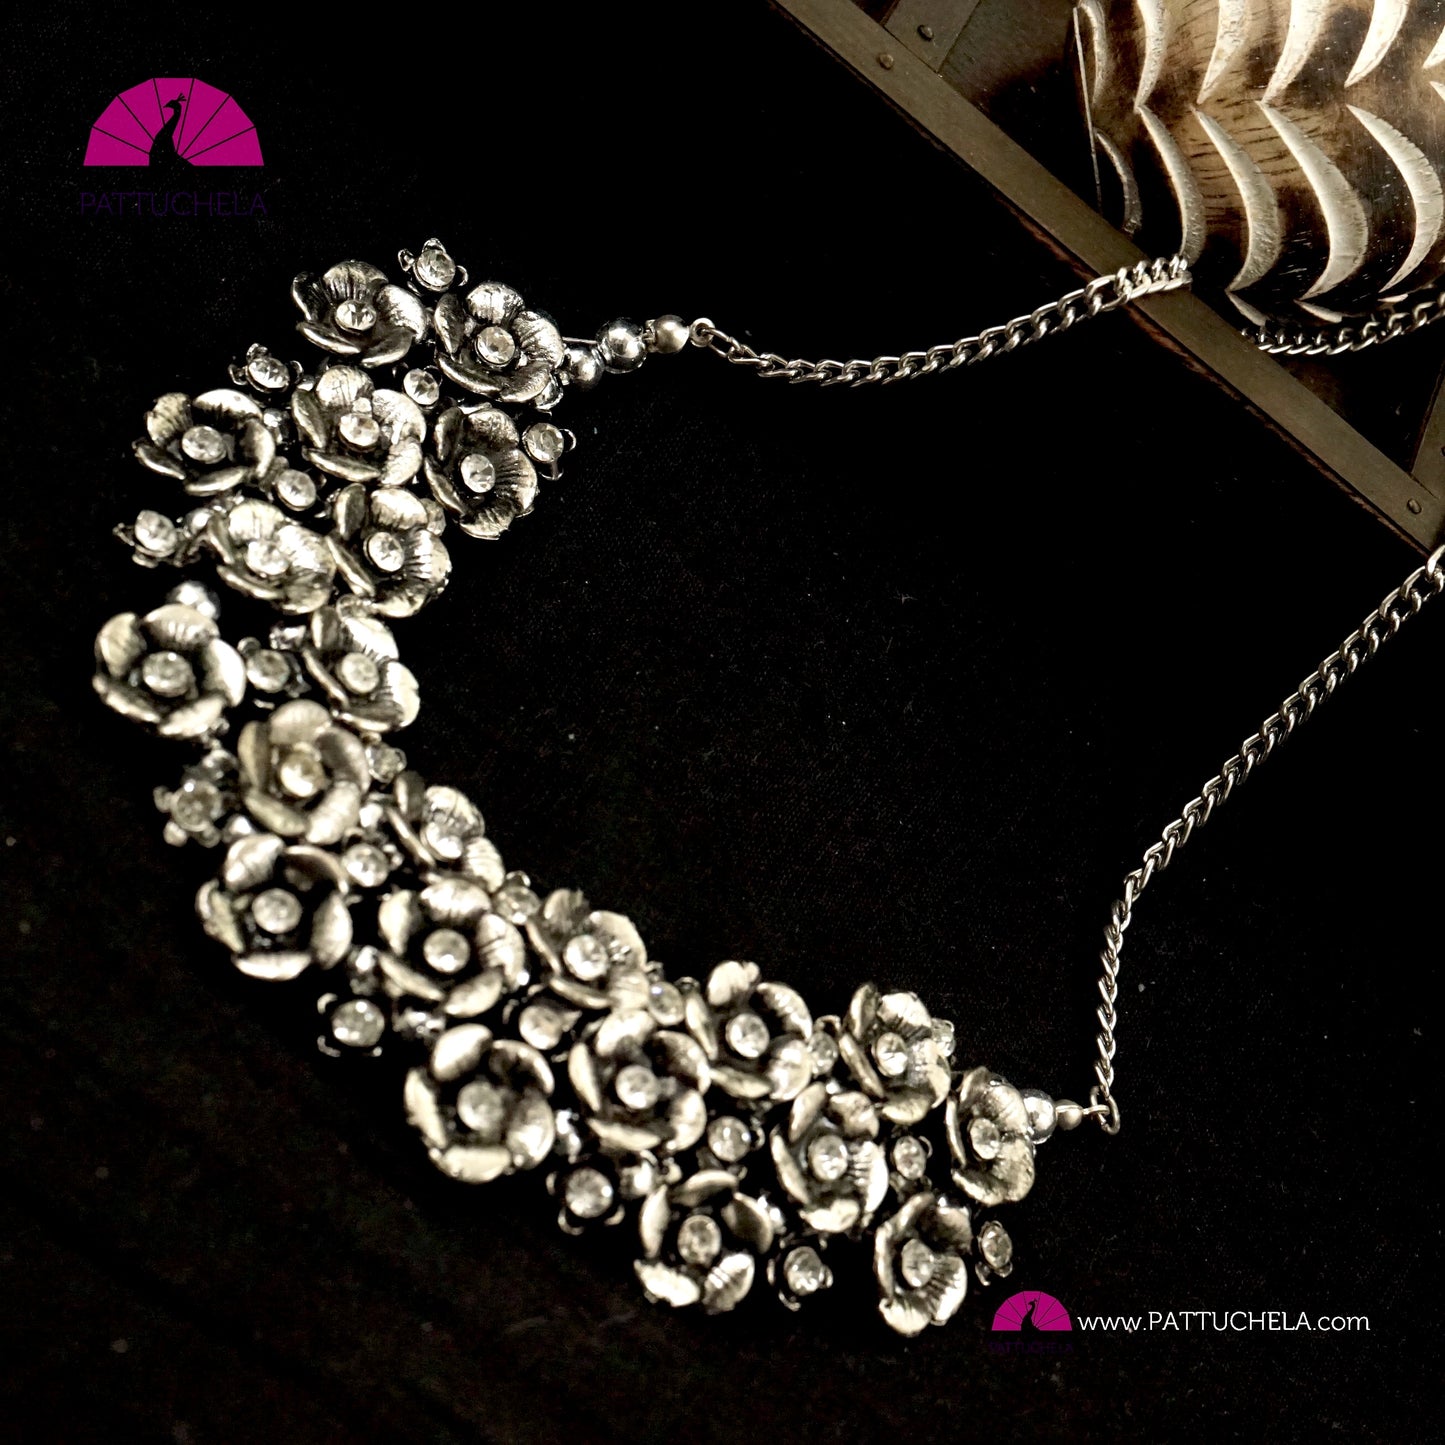 Unique Oxidized Silver Necklace in Floral pattern with White Stones| Formal & Casual Wear Necklace | Silver Jewelry